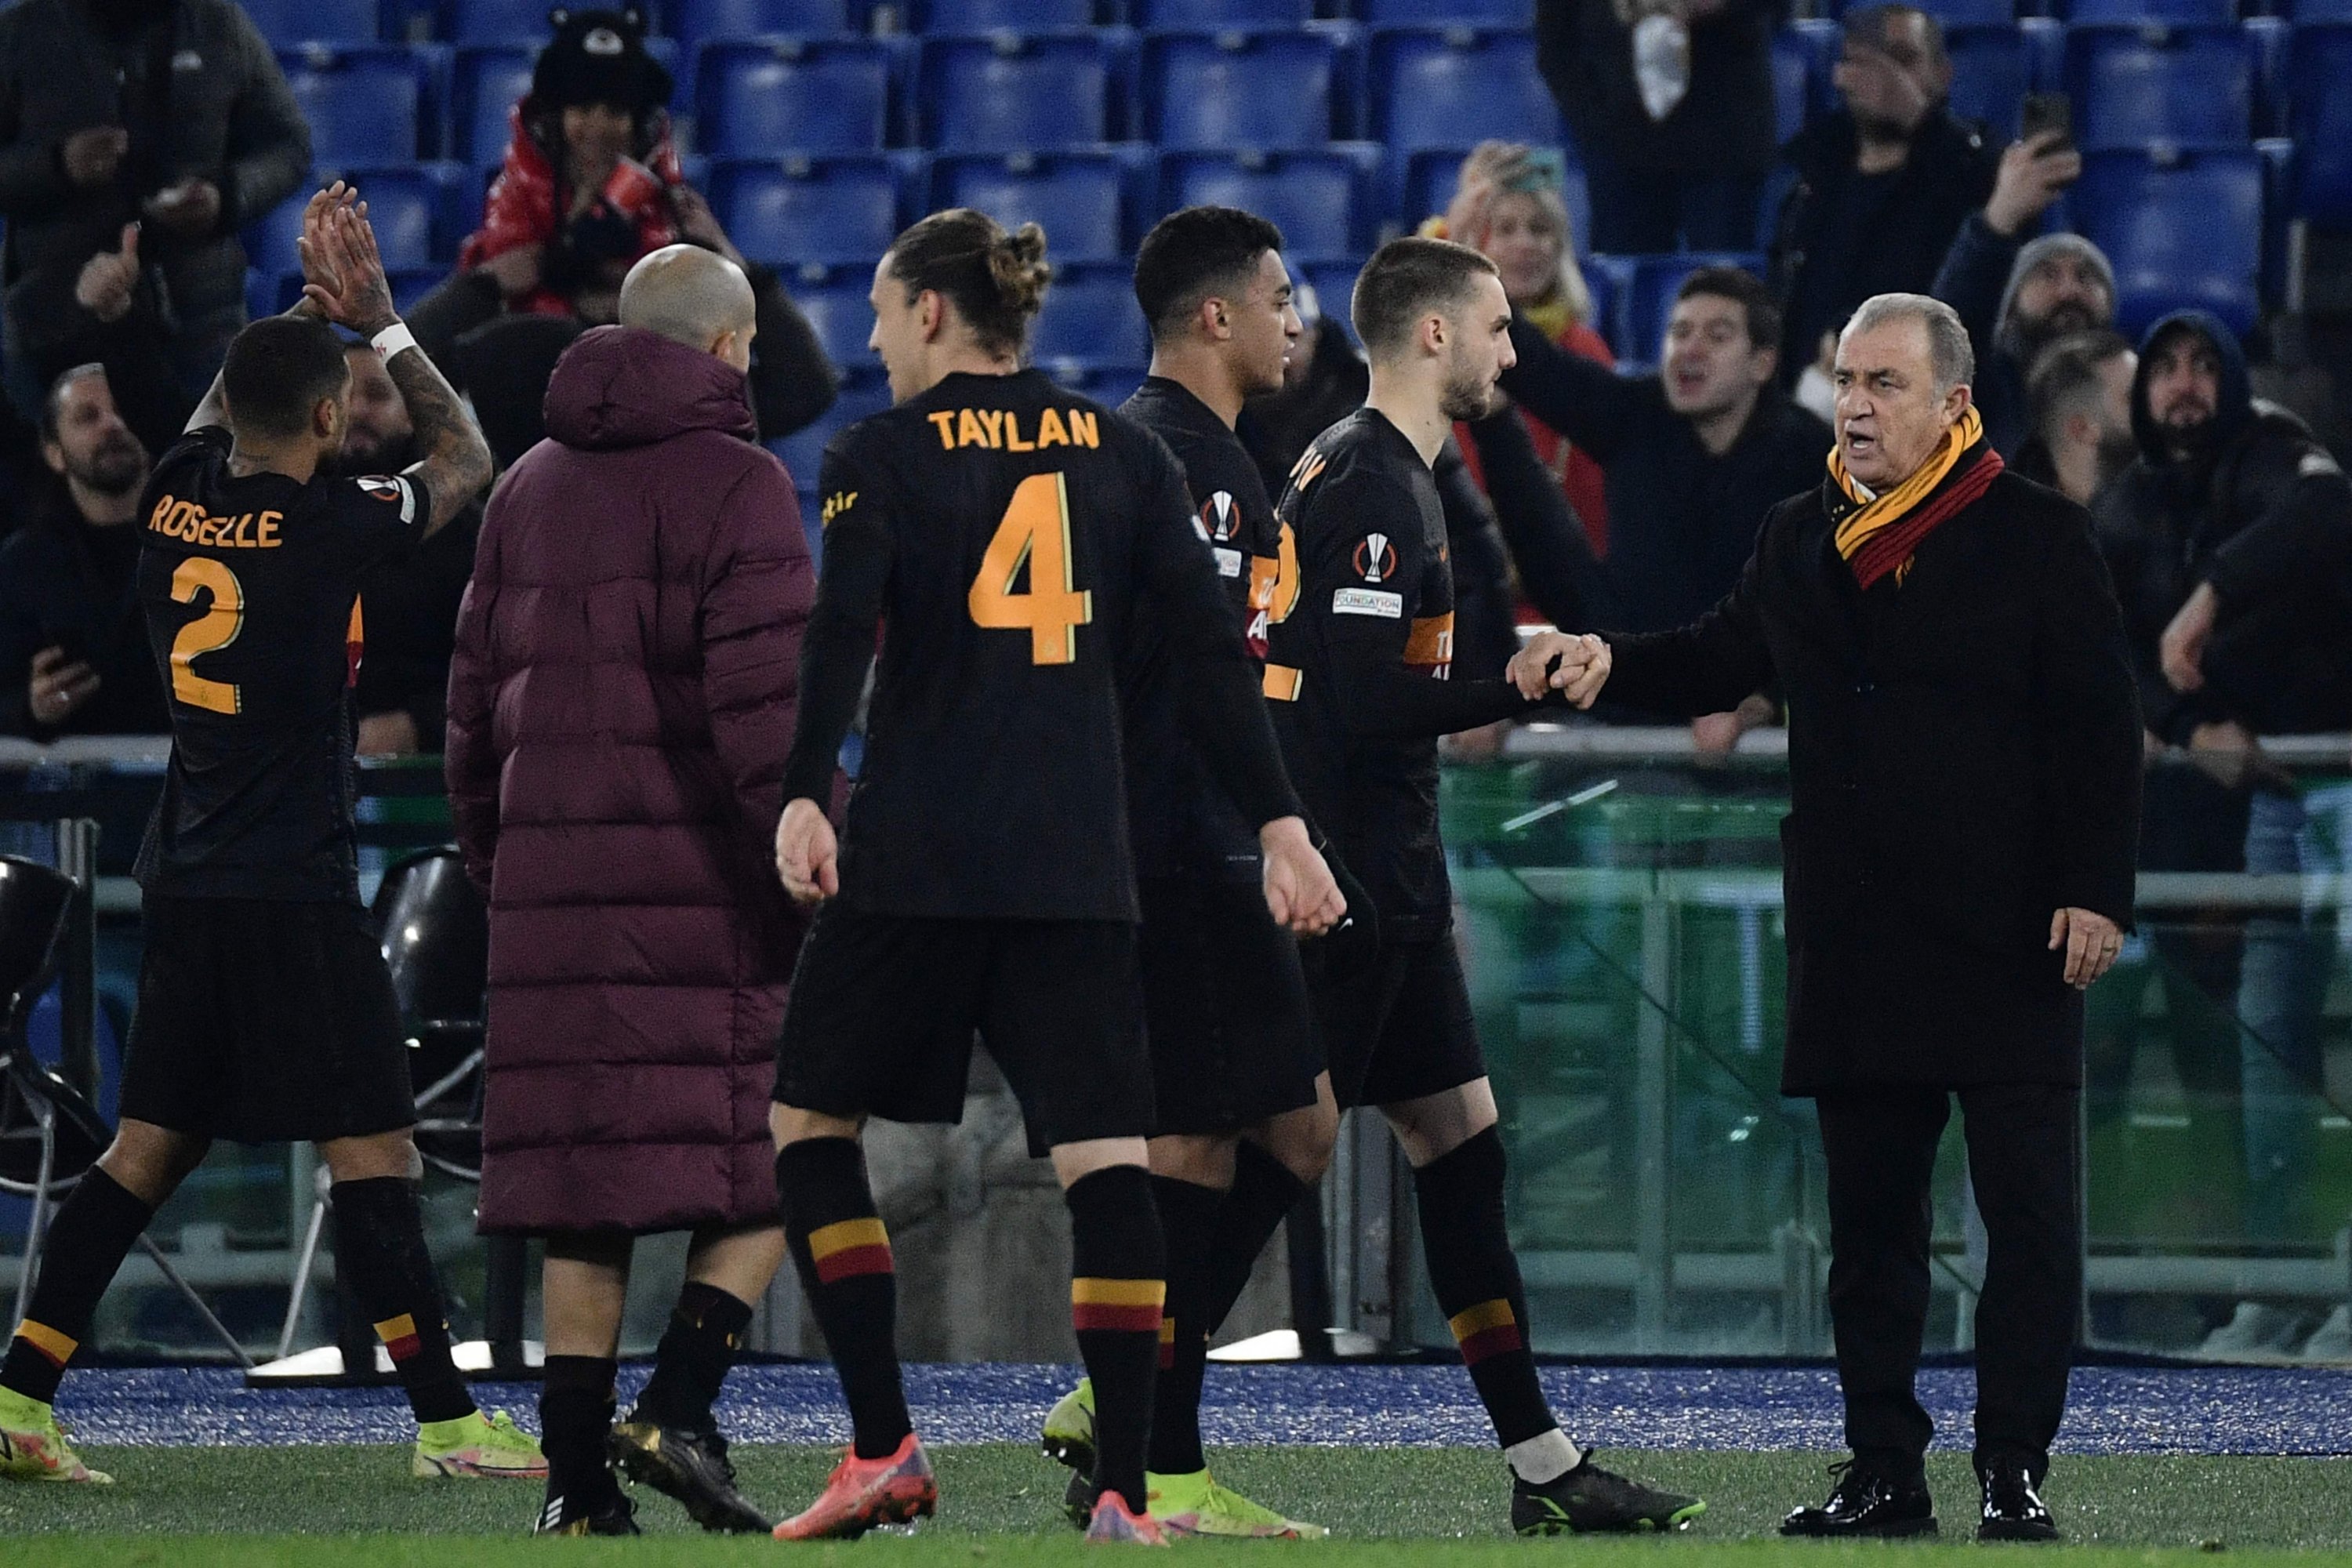 Galatasaray's coach Fatih Terim (R) congratulates his players at the end of the UEFA Europa League Group E football match between Lazio and Galatasaray on Dec. 9, 2021 at the Olympic stadium in Rome. (AFP Photo)